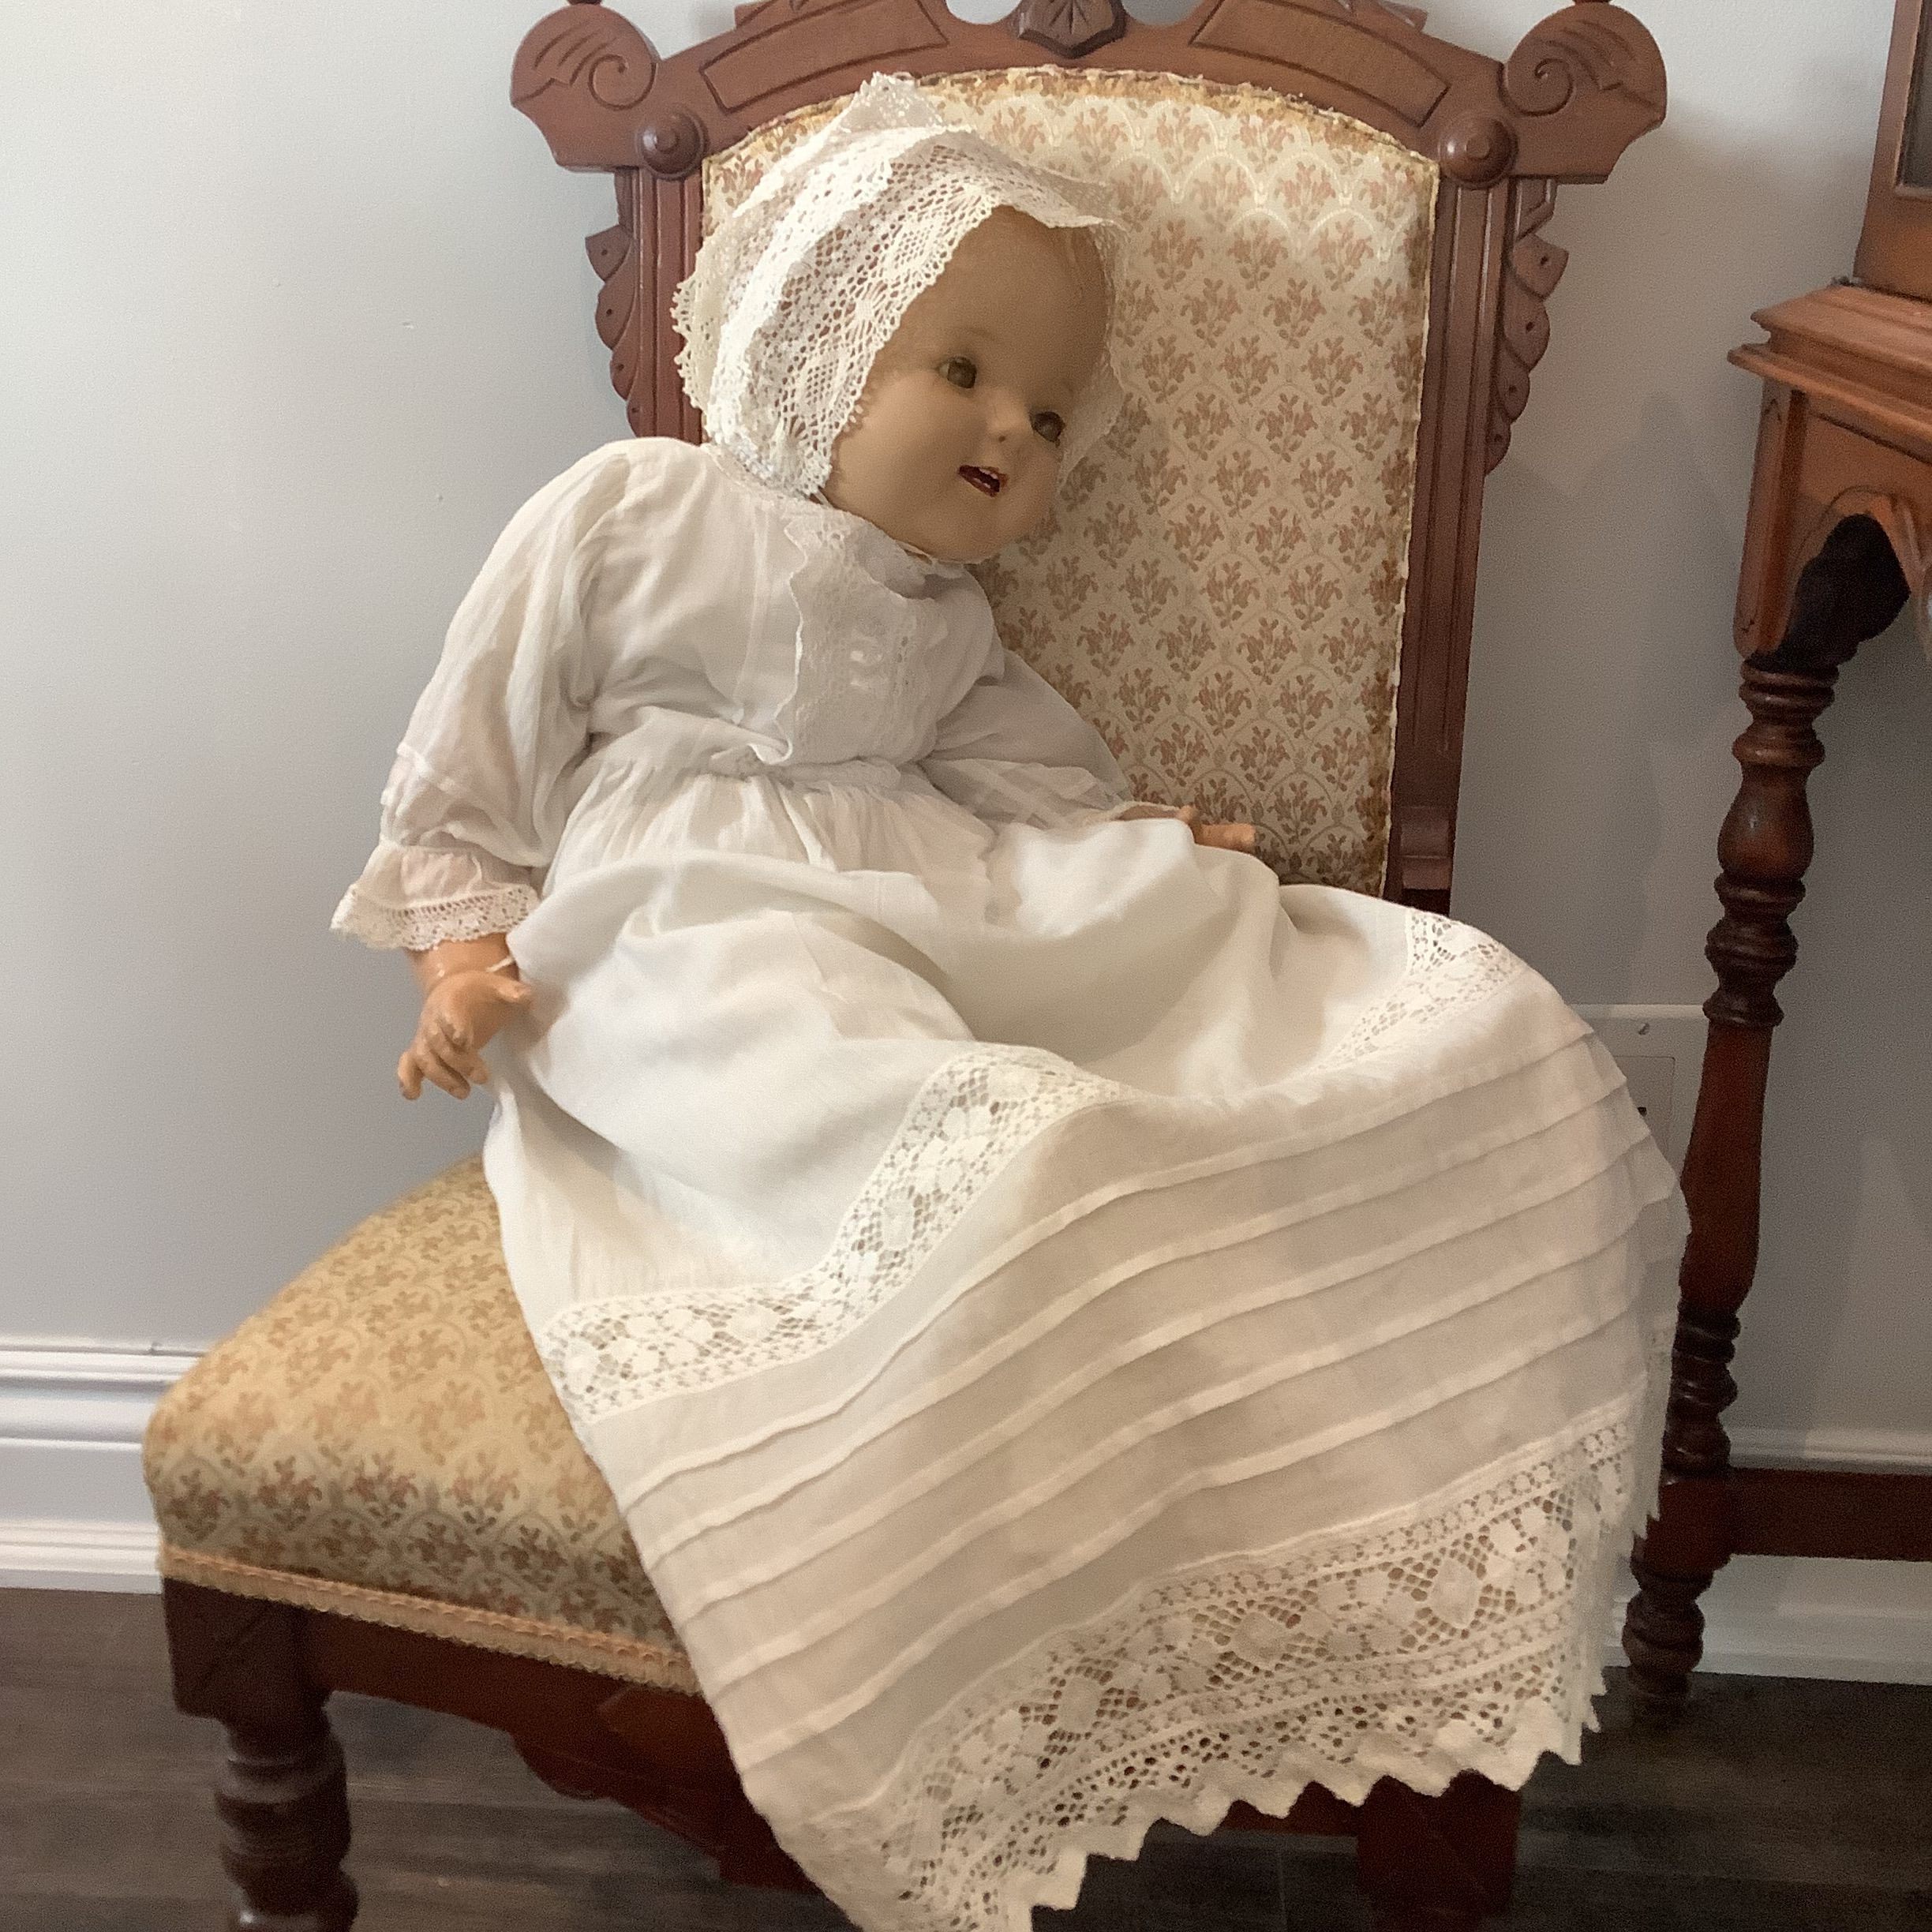 Vintage baby doll in chair